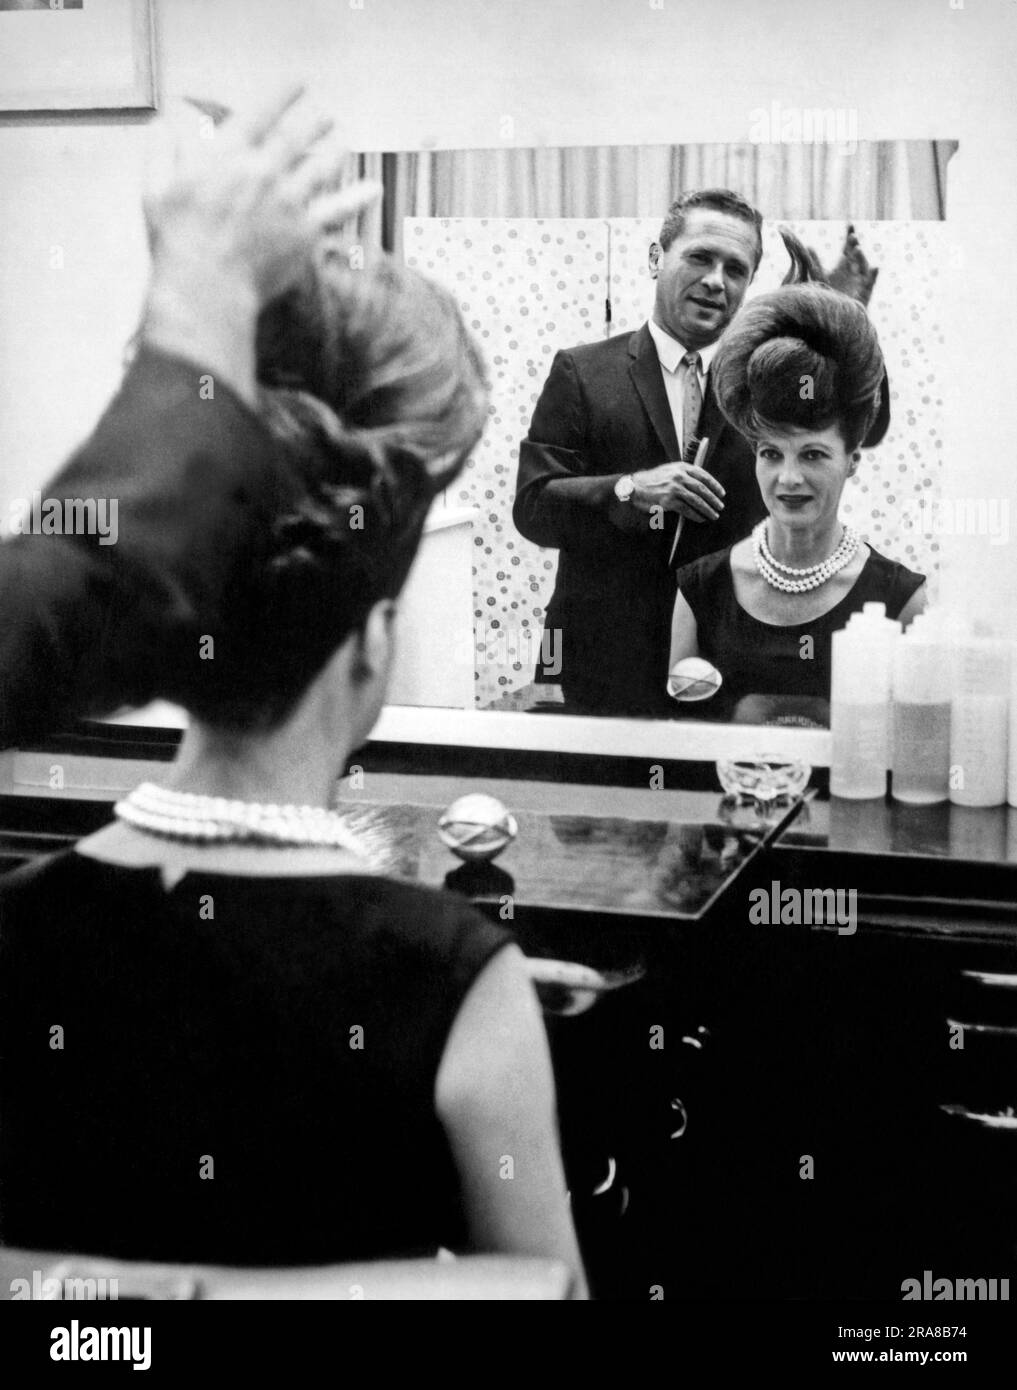 New York, New York:  1964. Ann Corio, star of 'This Was Burlesque', watches in the mirror as stylist John Fonda puts the finishing touches on 'The Unisphere Hairdo', inspired by the official symbol of the 1964 NY World's Fair. Stock Photo